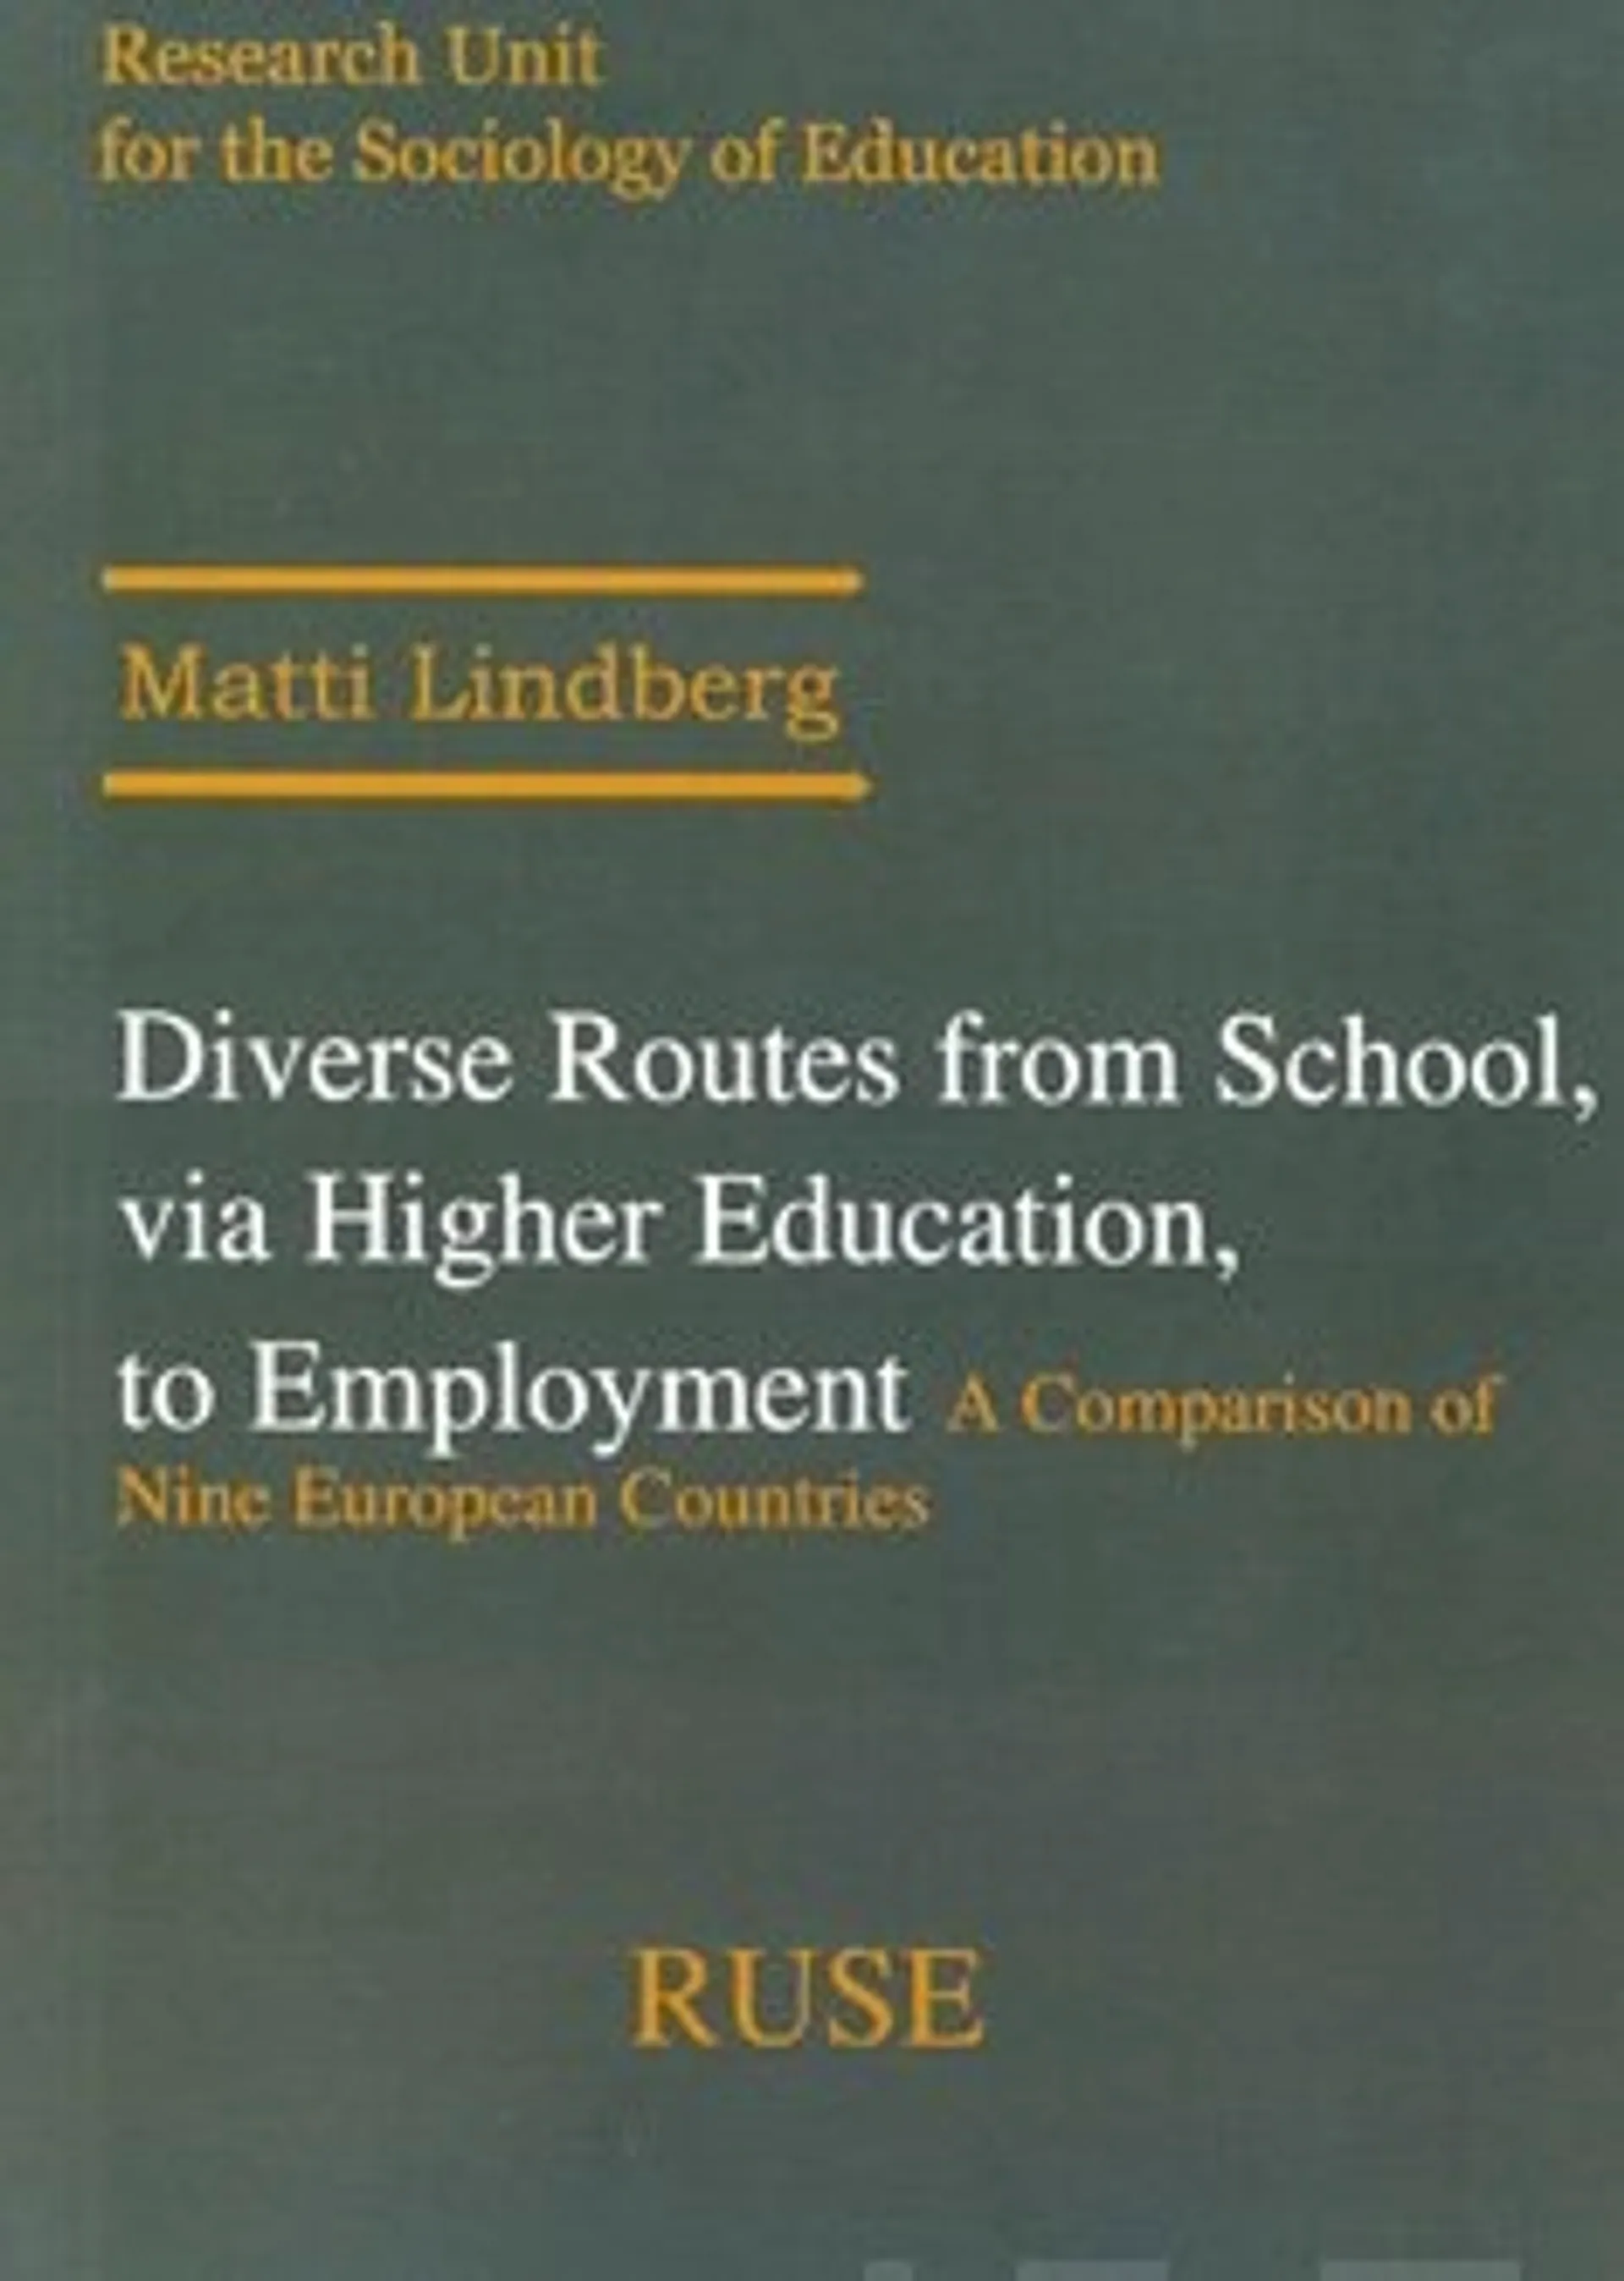 Diverse Routes from School, via Higher Education, to Employment